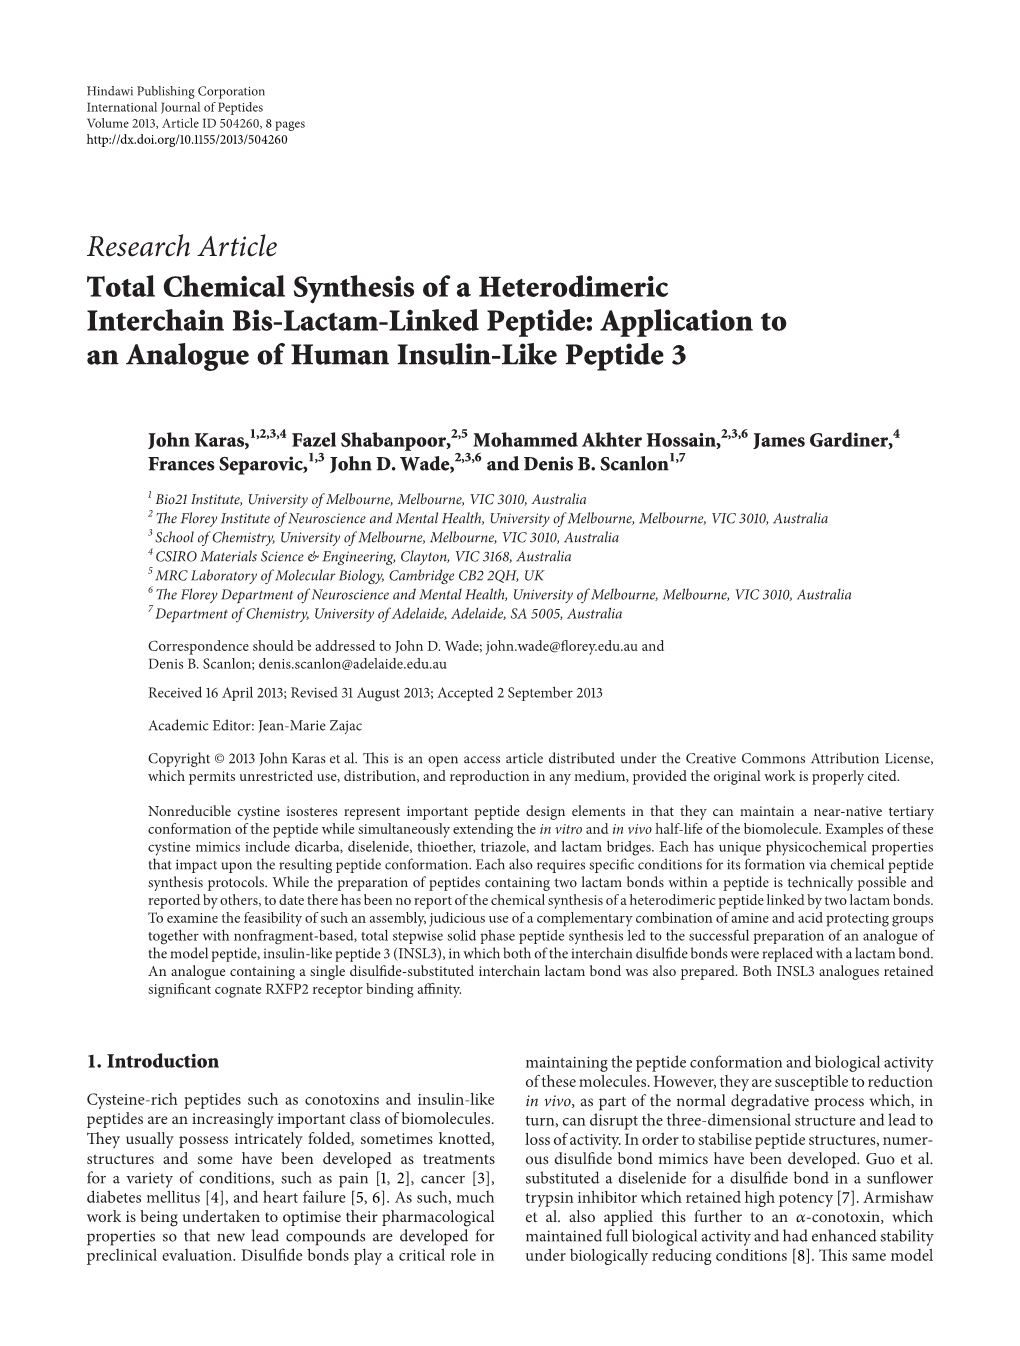 Total Chemical Synthesis of a Heterodimeric Interchain Bis-Lactam-Linked Peptide: Application to an Analogue of Human Insulin-Like Peptide 3